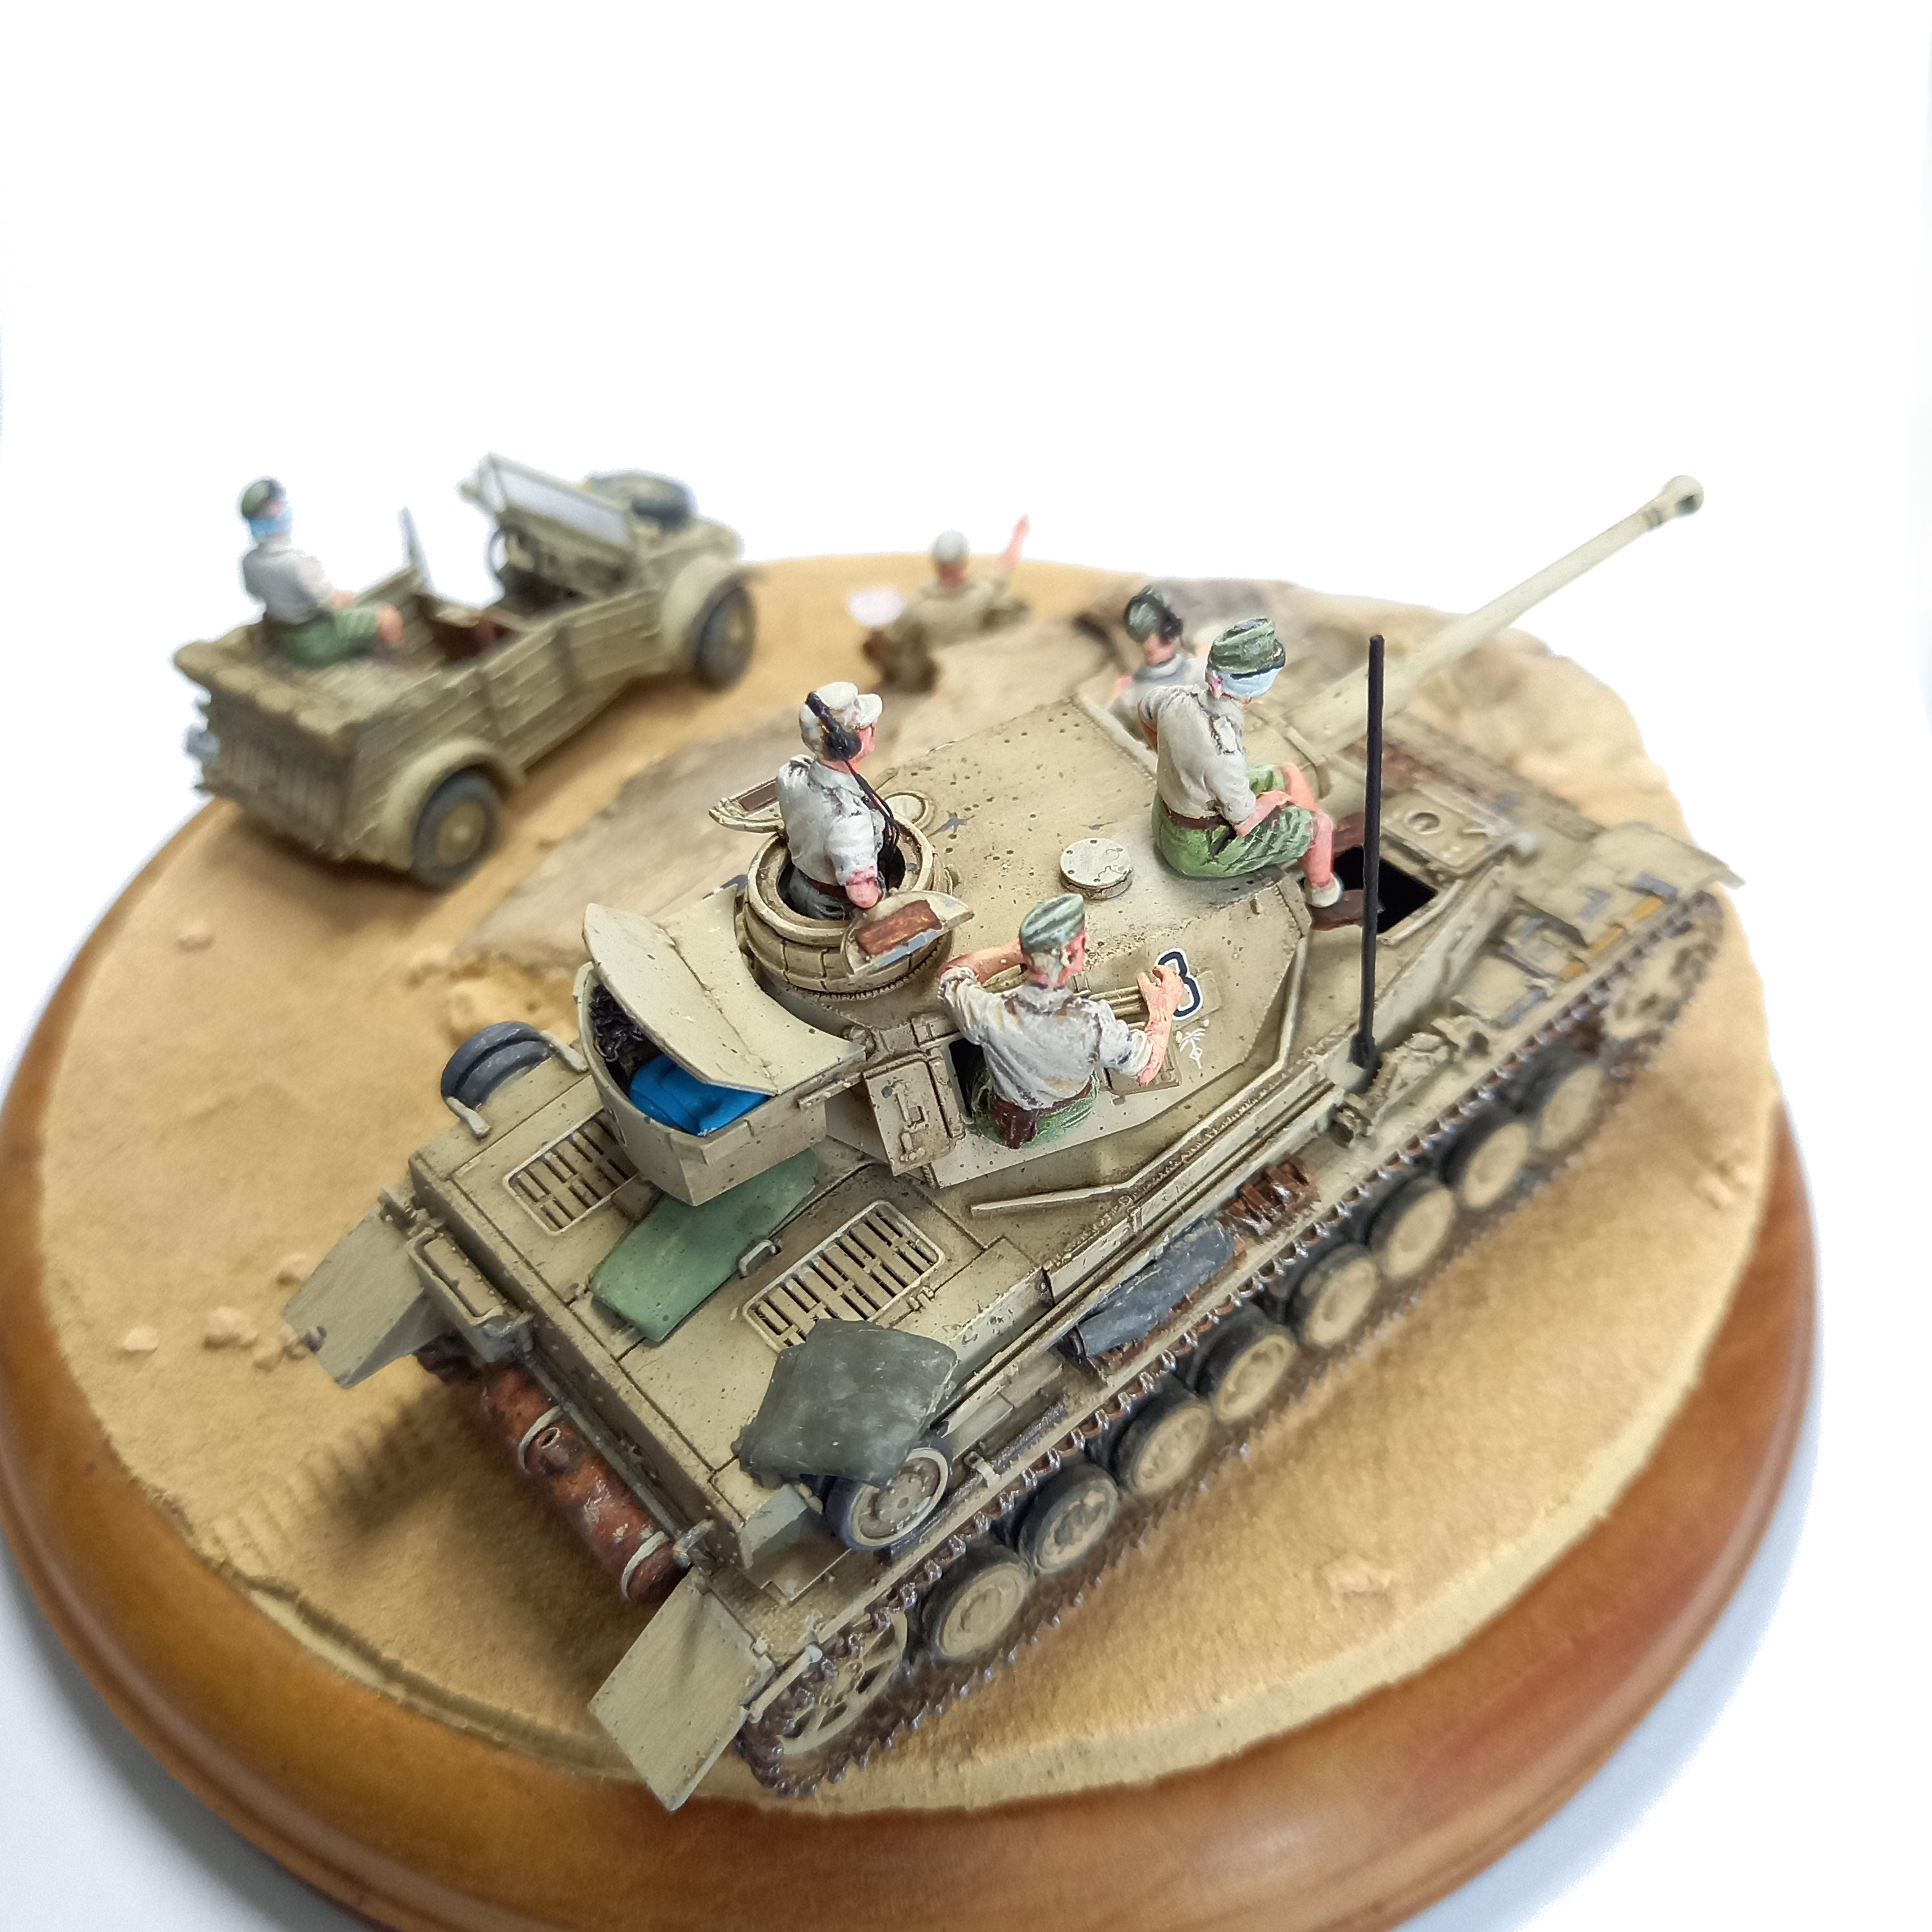 [GB Afrique] Panzer IV F2 [TERMINE] - Page 2 20230912_182435